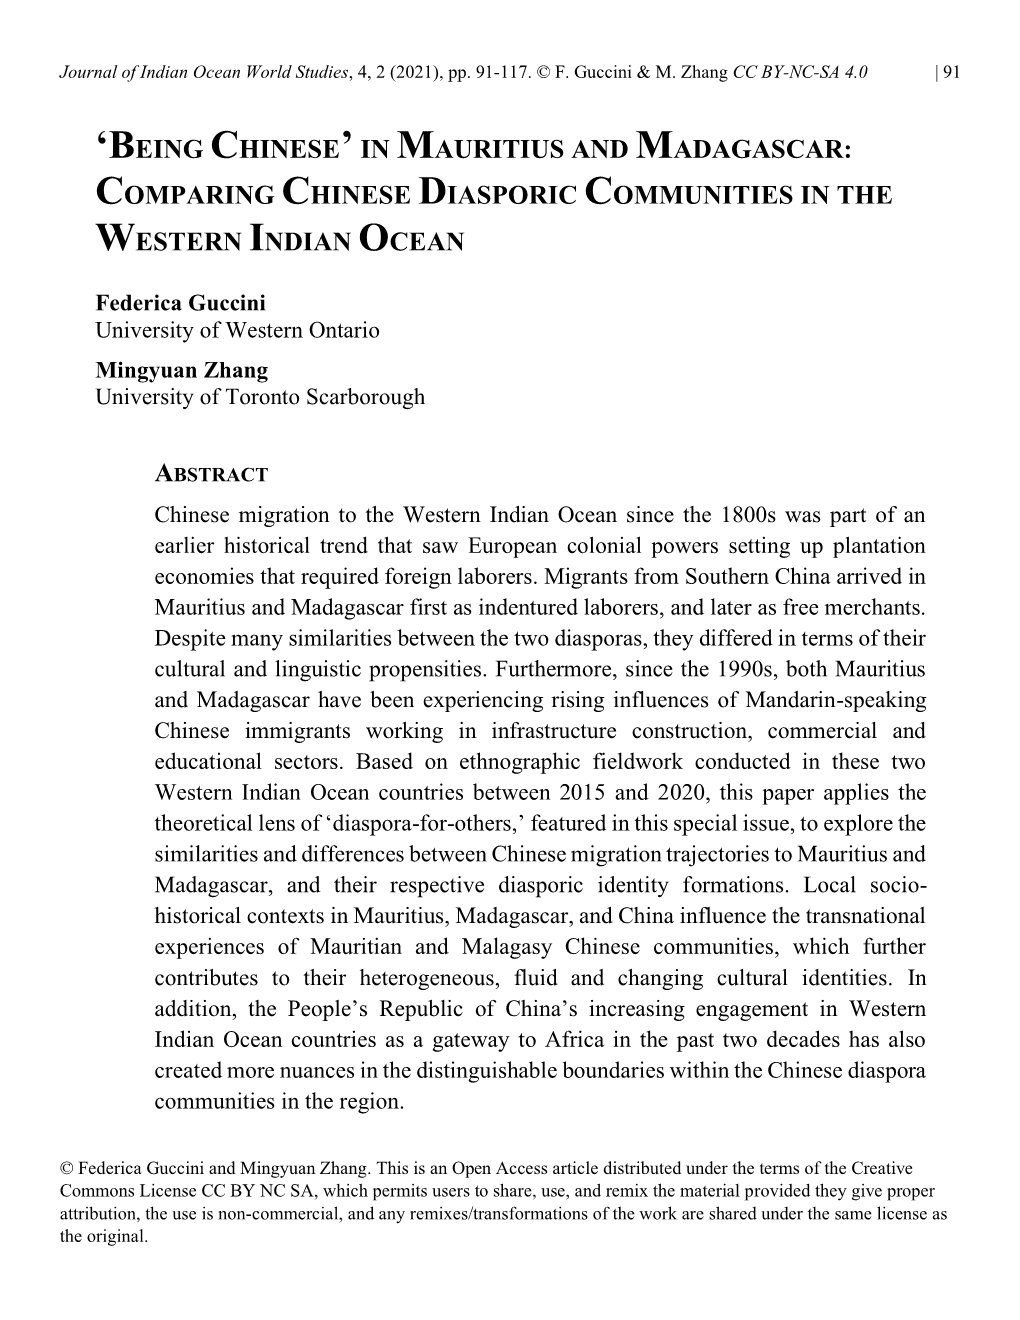 Comparing Chinese Diasporic Communities in the Western